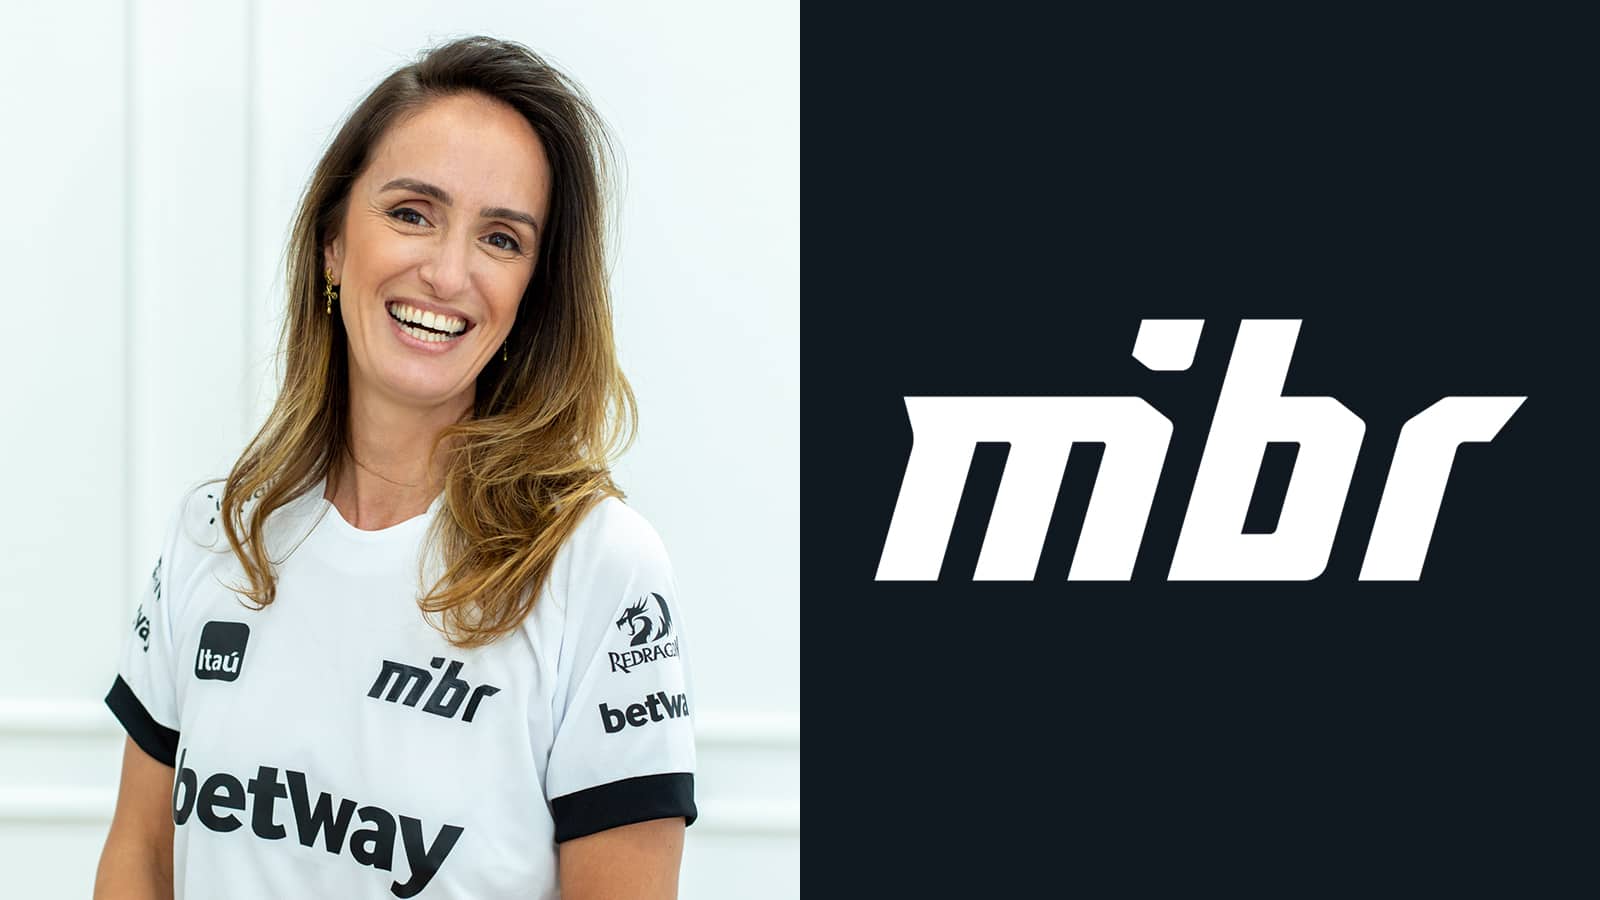 Socios.com partners MIBR as the first Brazilian Esports team to launch its  Fan Token - Gaming And Media